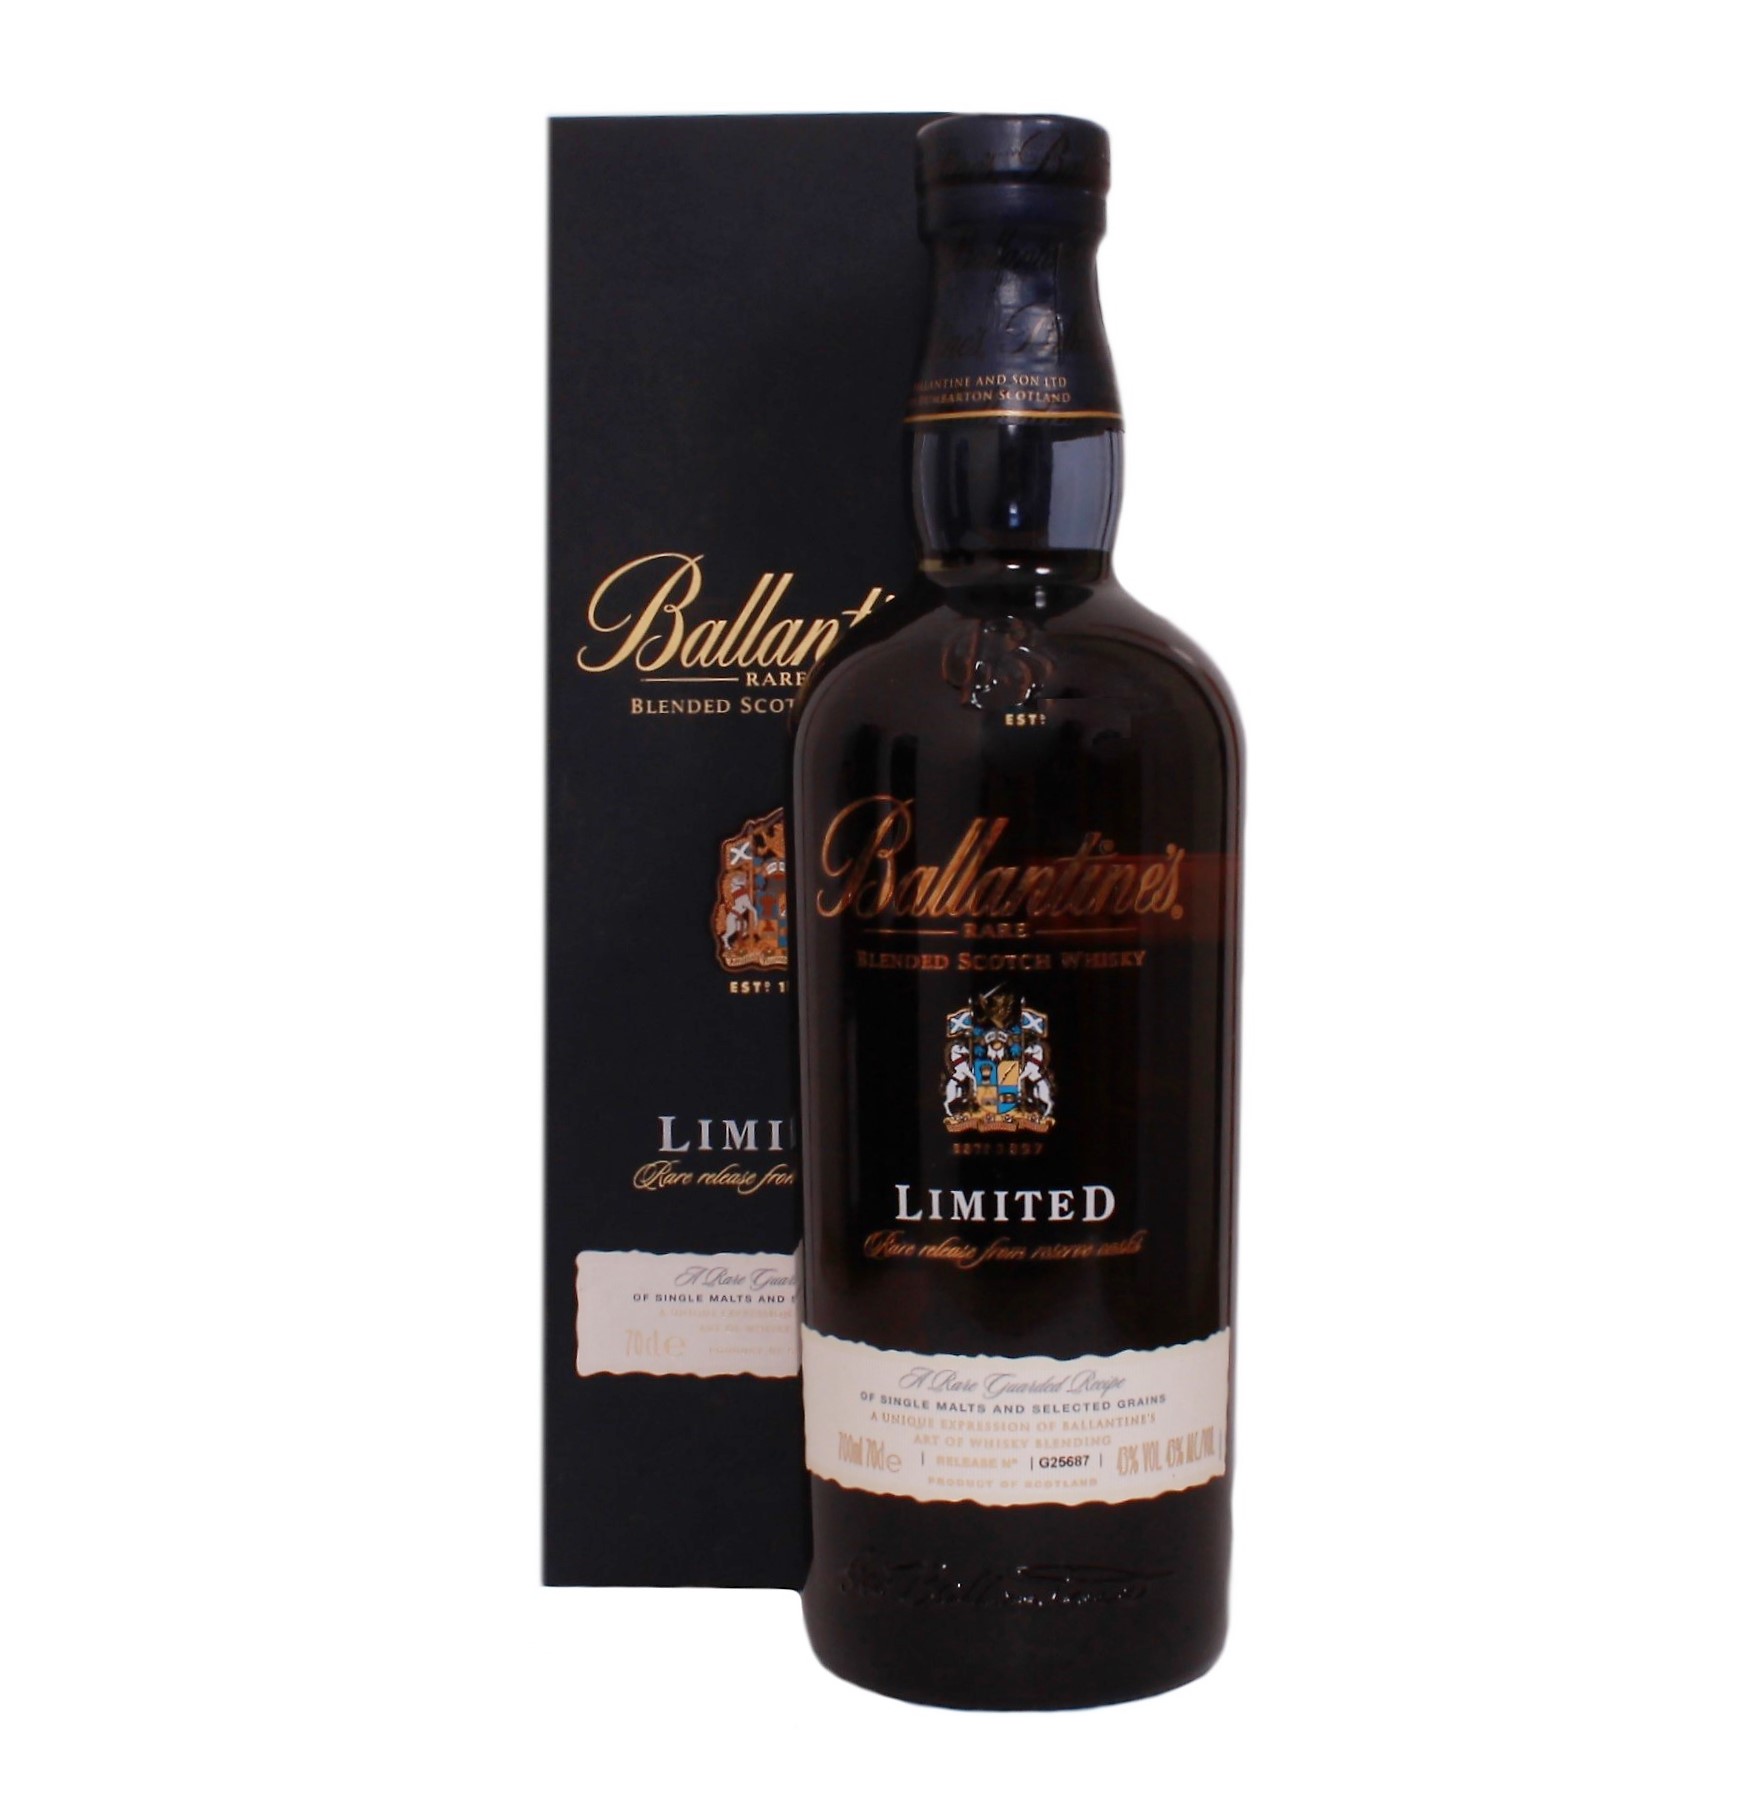 Ballantines blended Scotch whisky rare limited